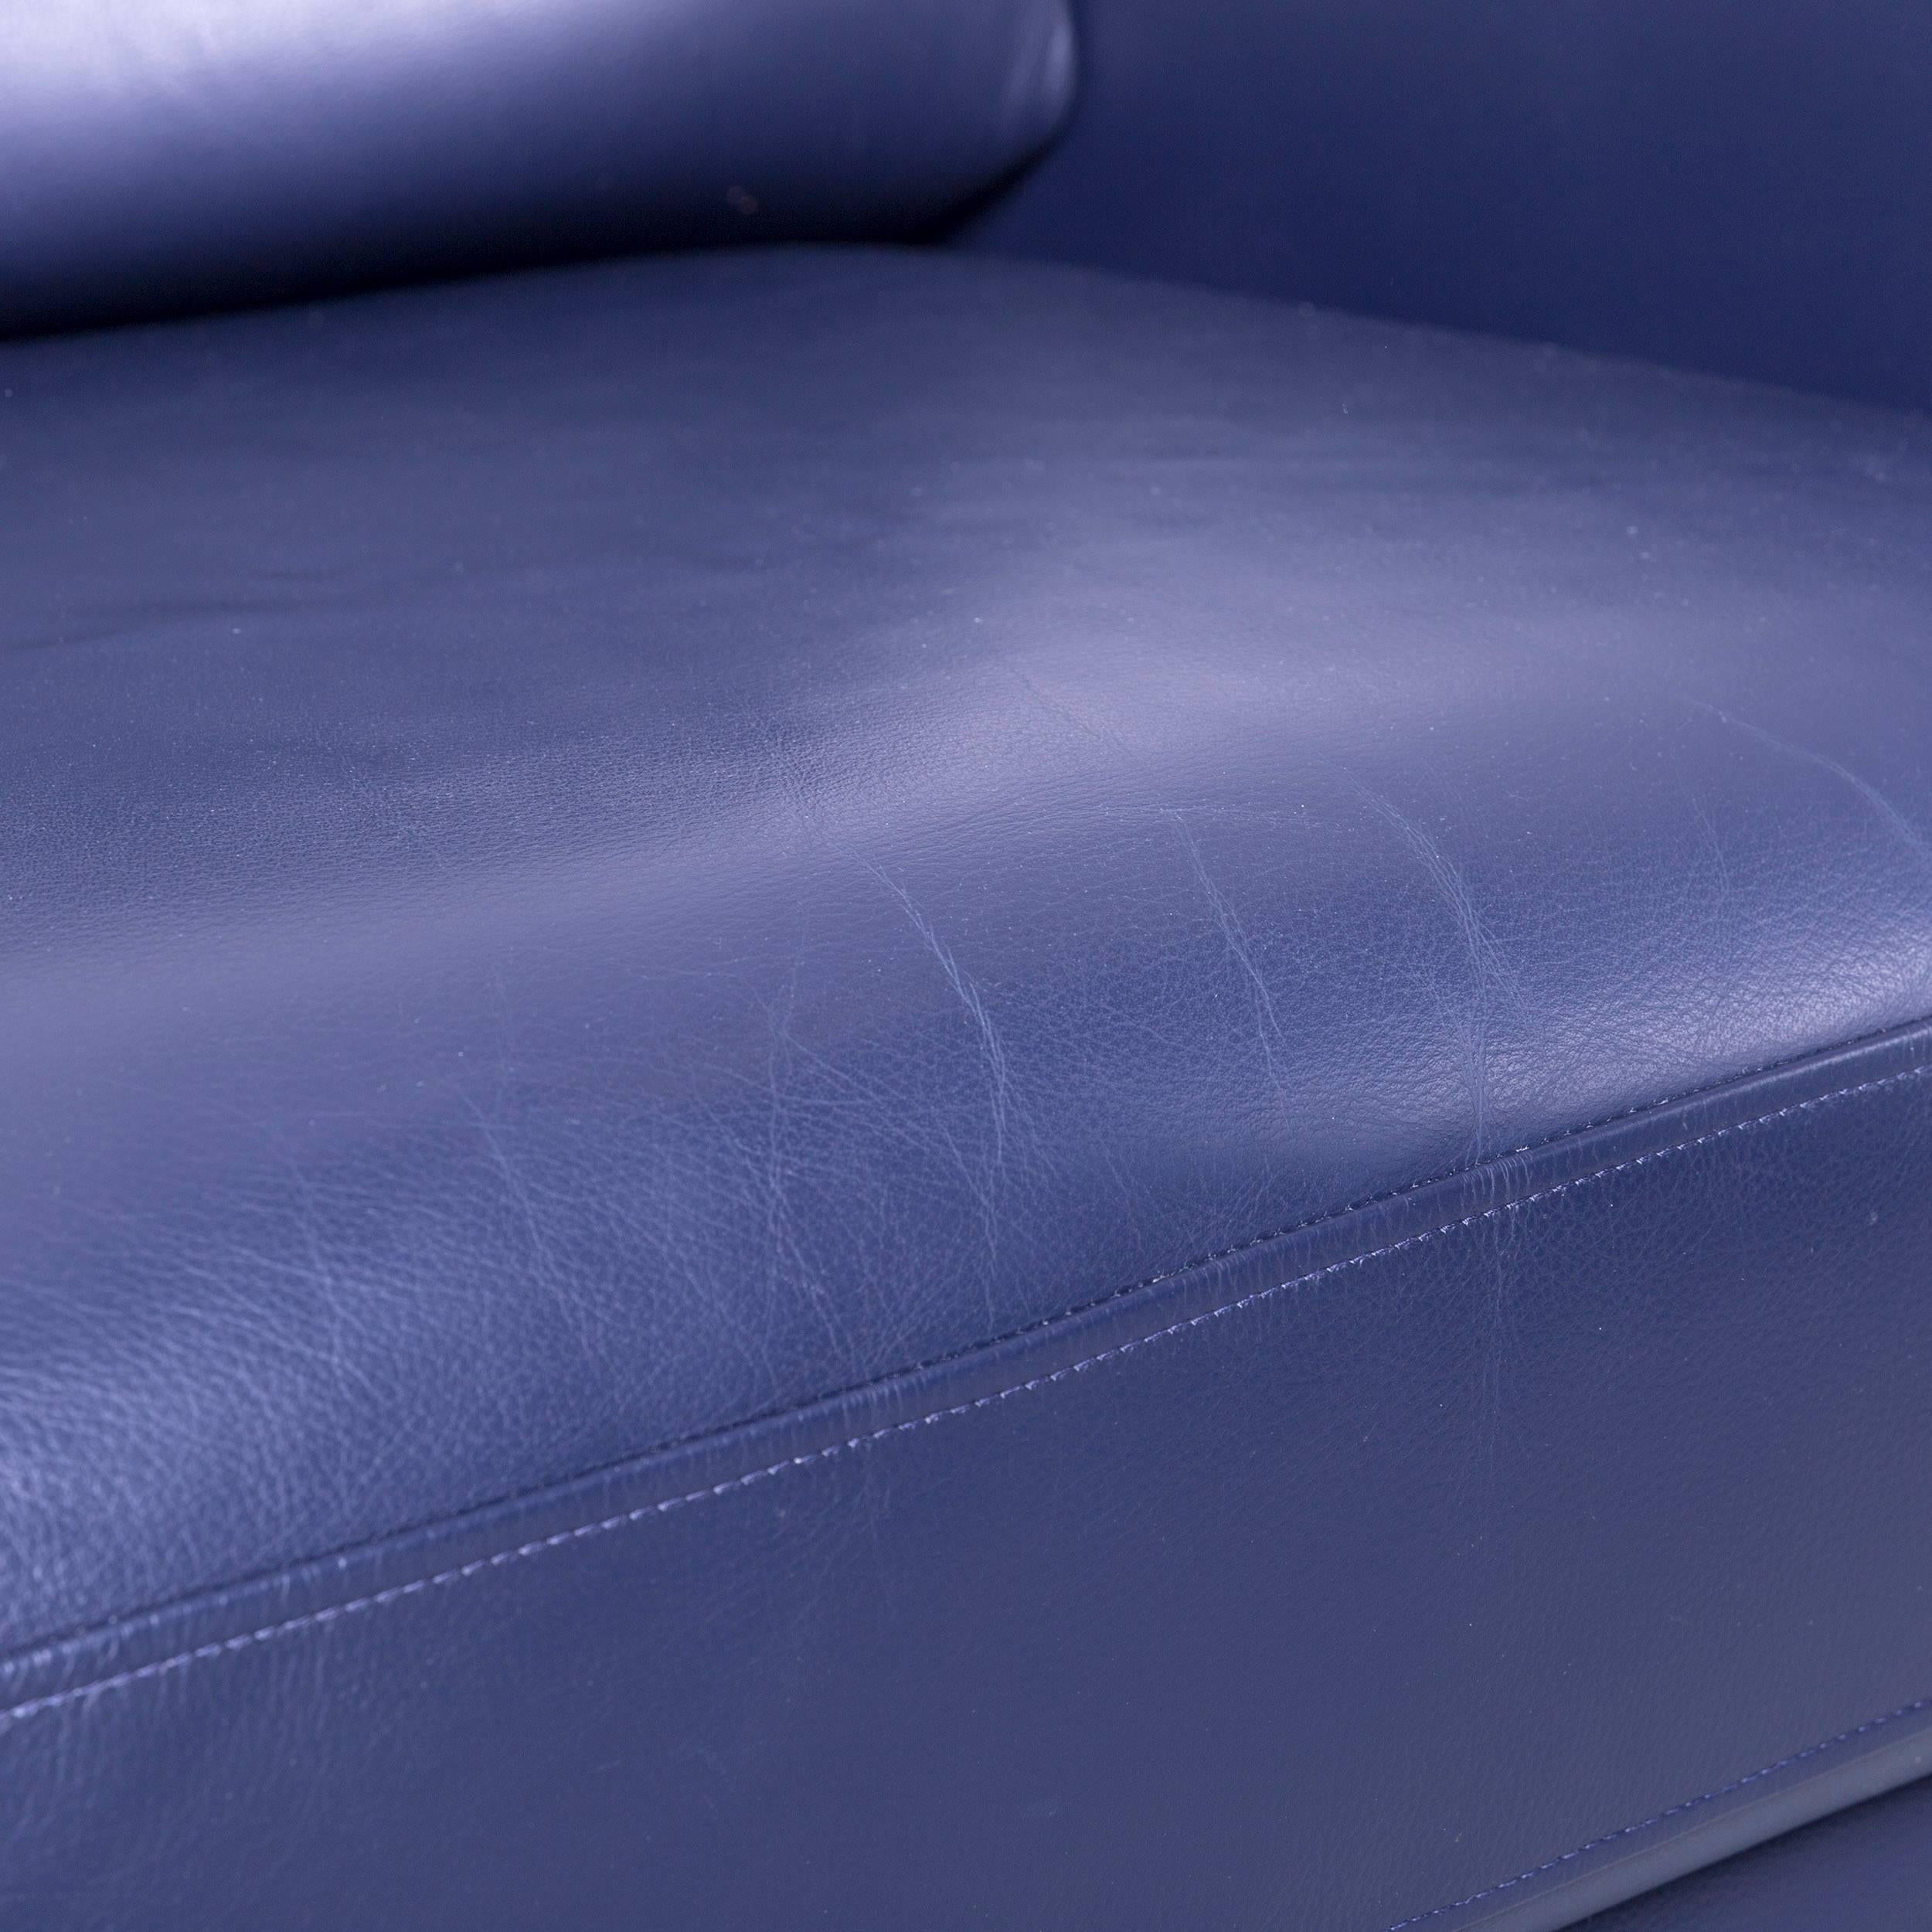 Rolf Benz Ego designer armchair in blue leather made in Germany.